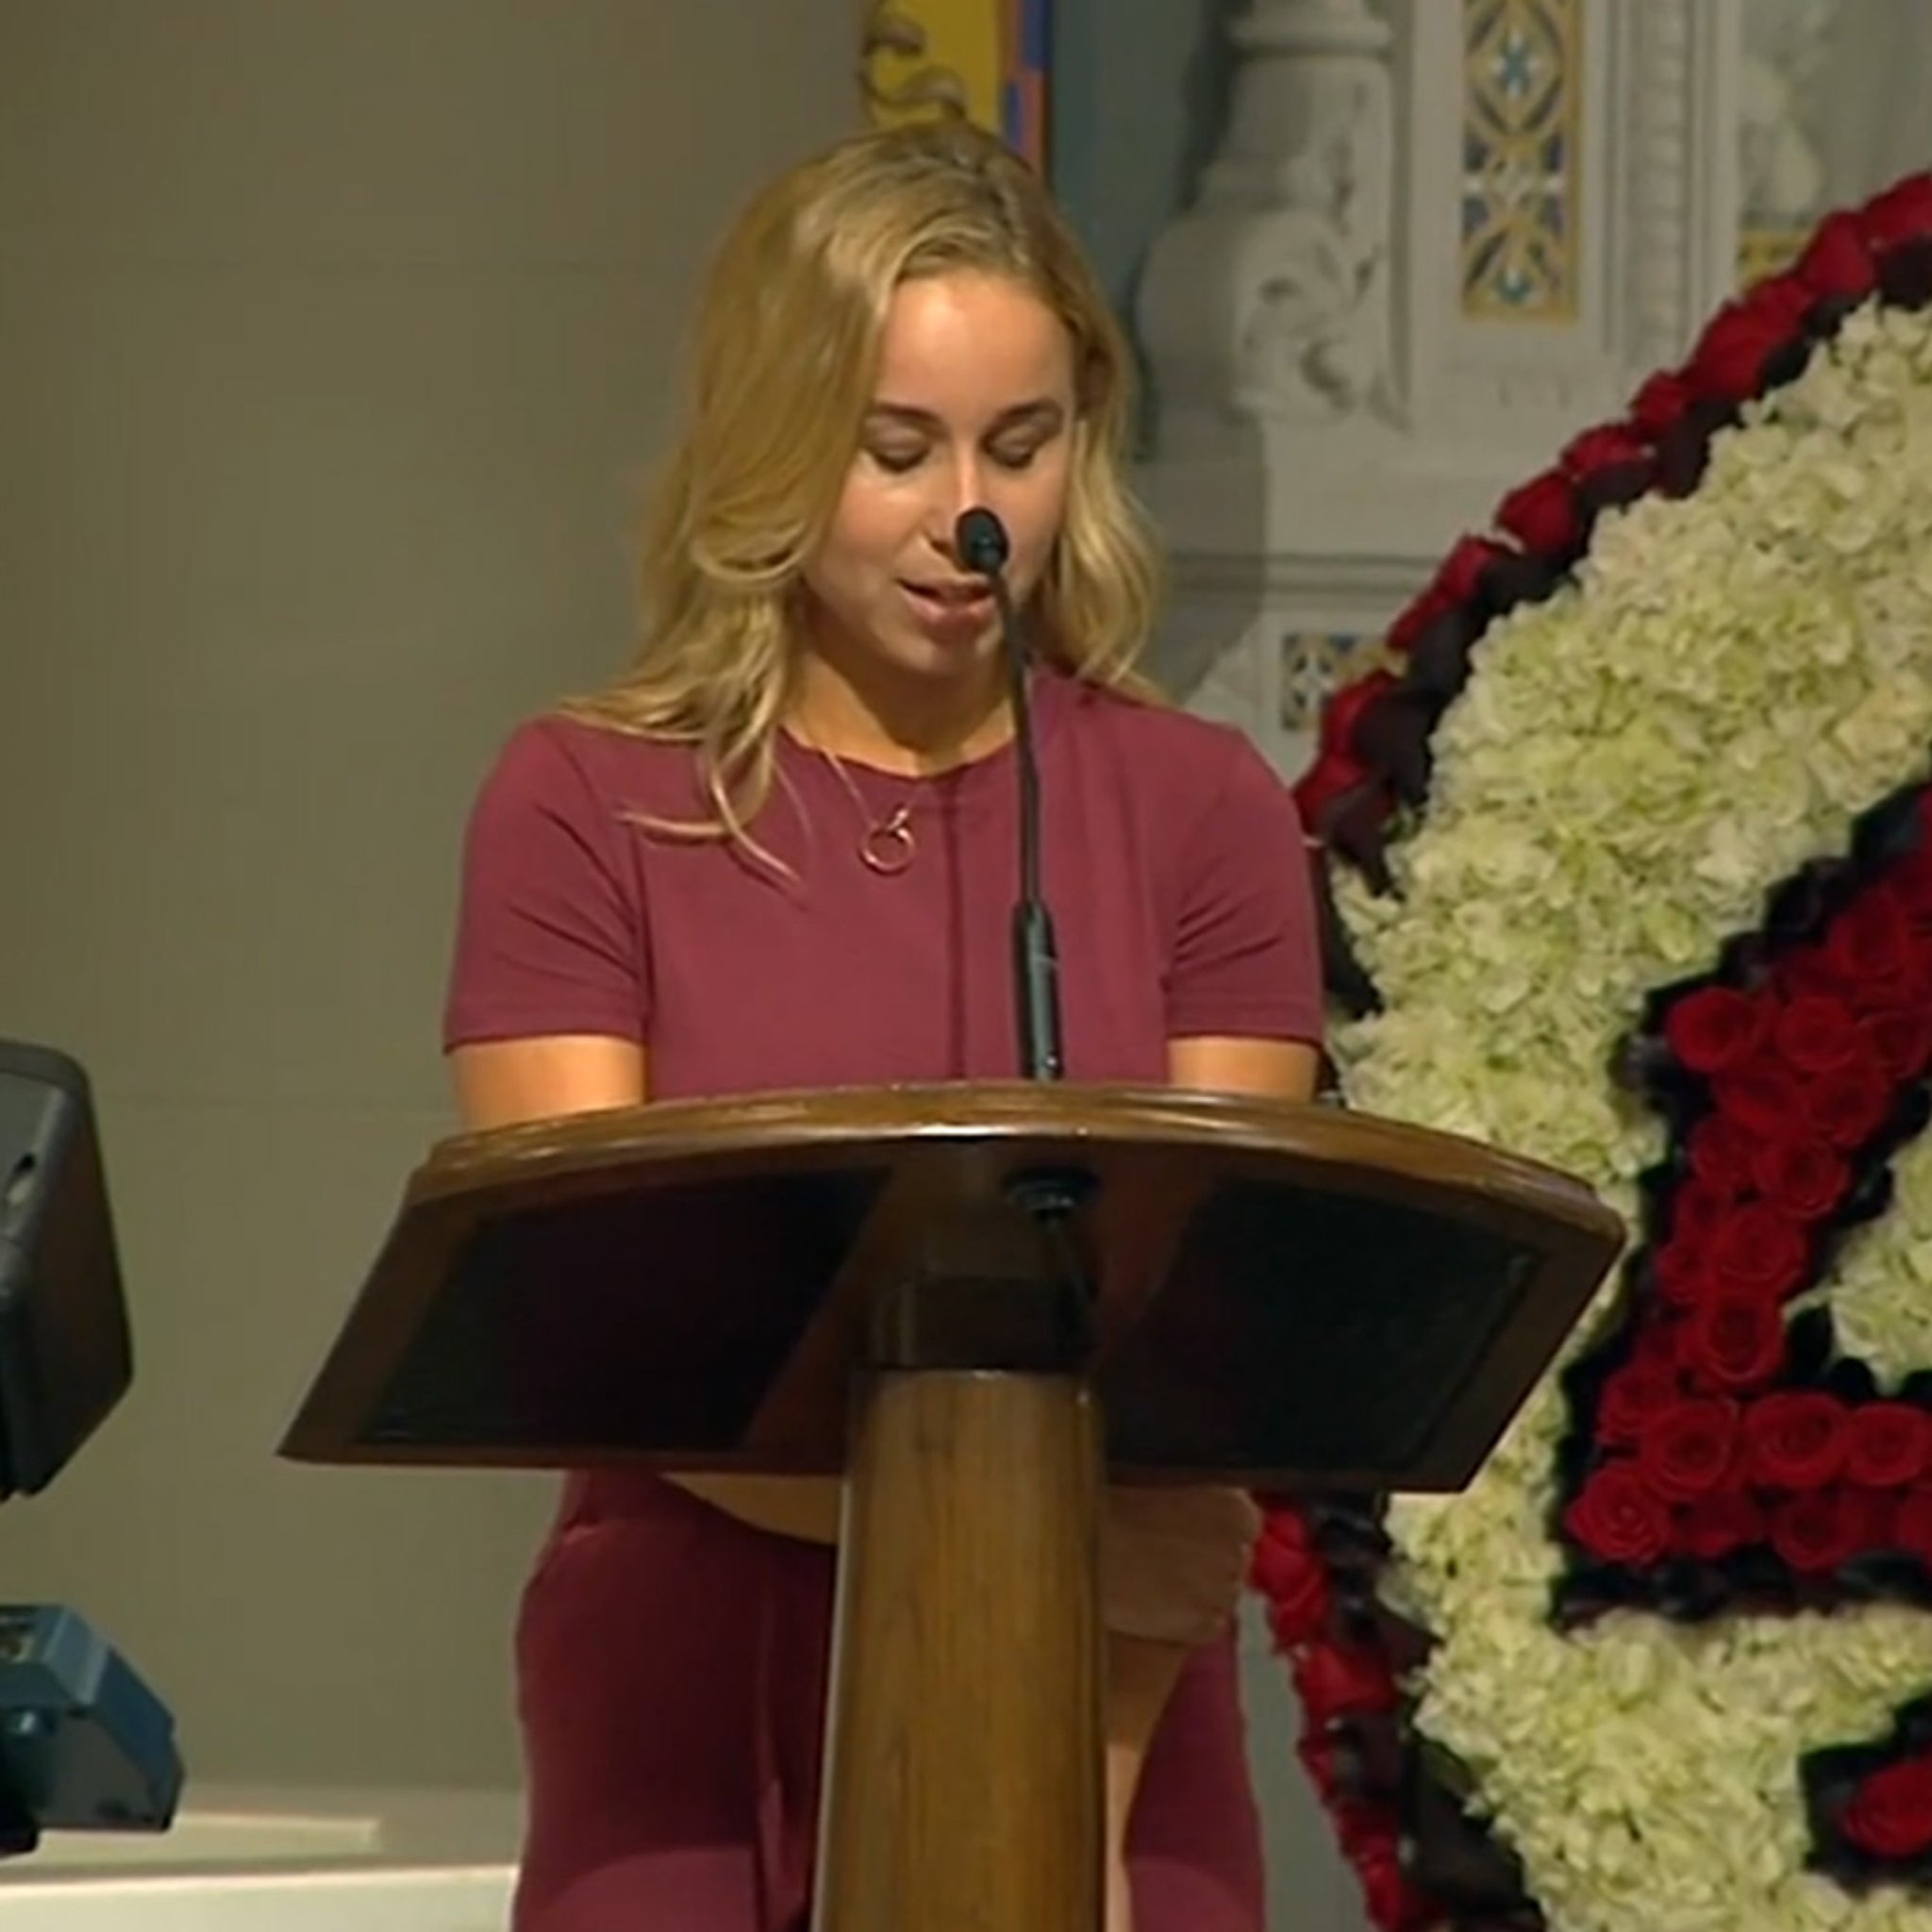 Tyler Skaggs' Wife Gives Emotional Eulogy at Funeral, 'My Forever Soulmate